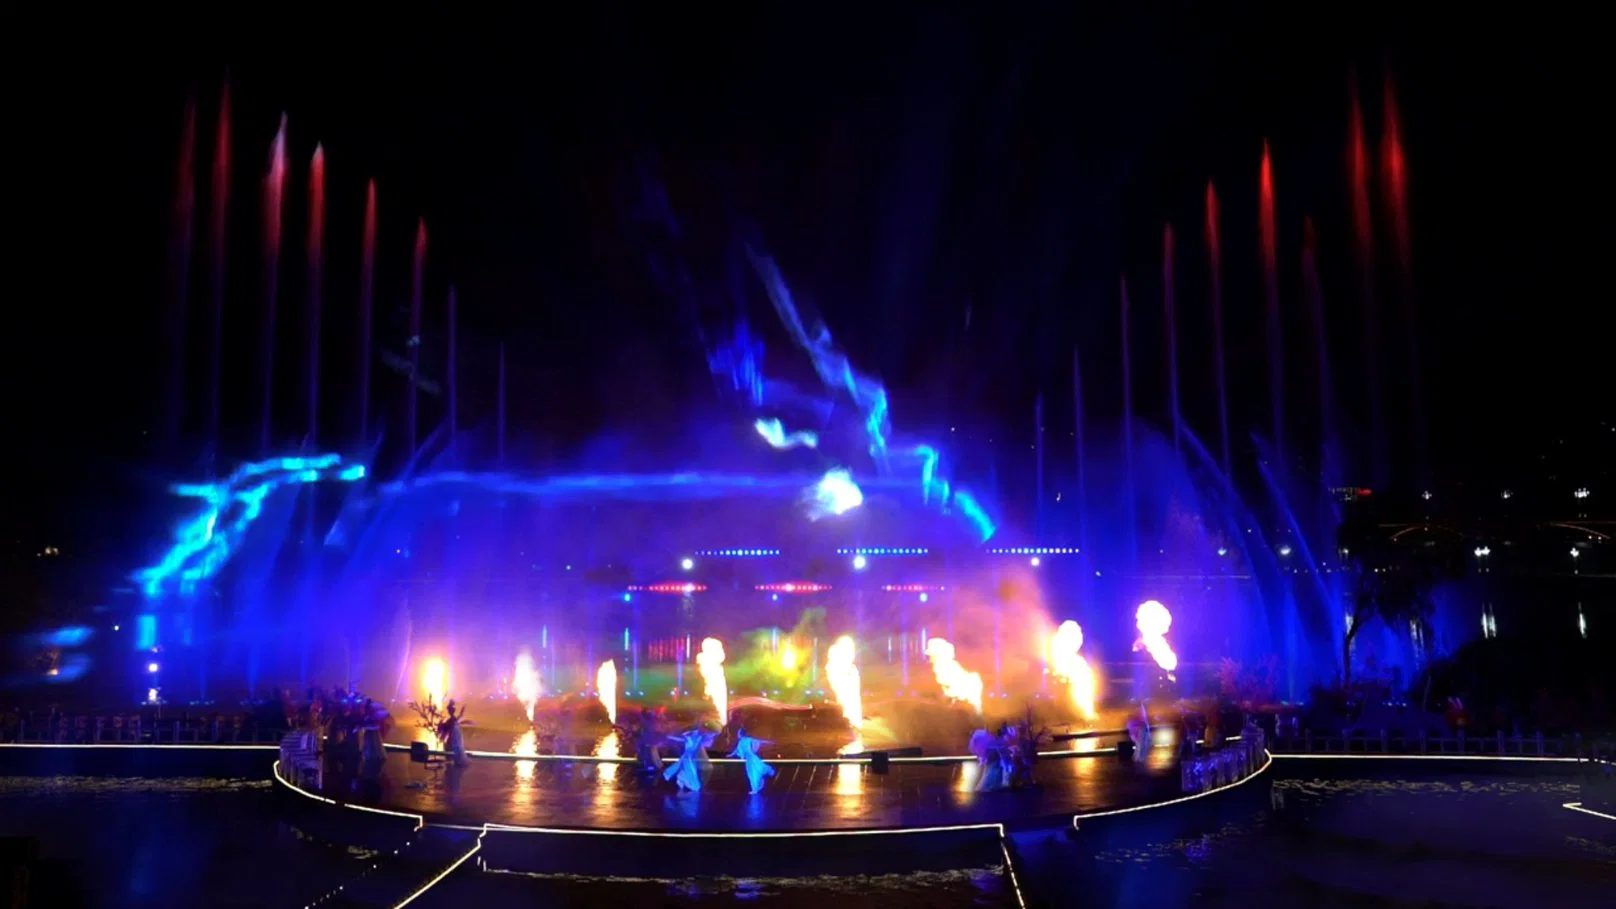 Night Time Tour Water Music Fountain Show with Lasers Beam Light Actors Amazing Water Show Performance Indoor and Outdoor